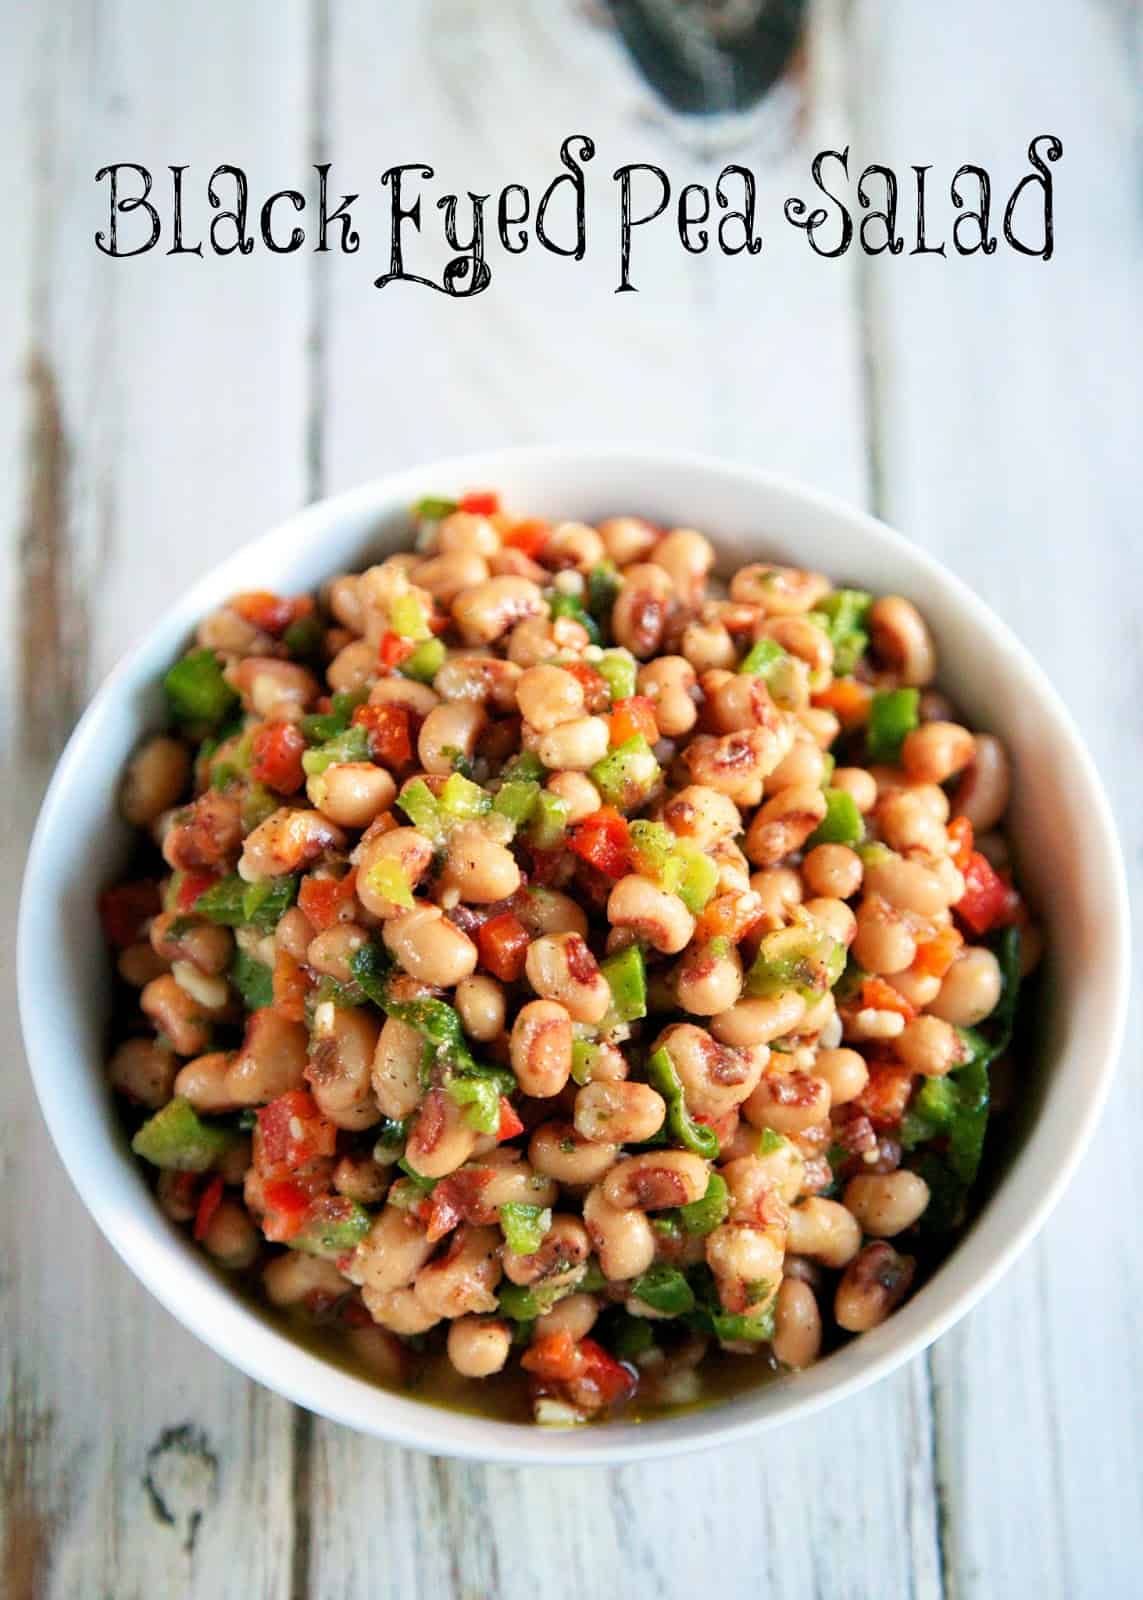 Black Eyed Pea Salad Recipe - red bell pepper, green pepper, scallions, garlic, olive oil, vinegar, parsley and black eye peas - GREAT side dish! We also like it as a dip. Make ahead of time and refrigerate - will last for several days. Recipe adapted from the famous Hattie B's Hot Chicken restaurant in Nashville, TN